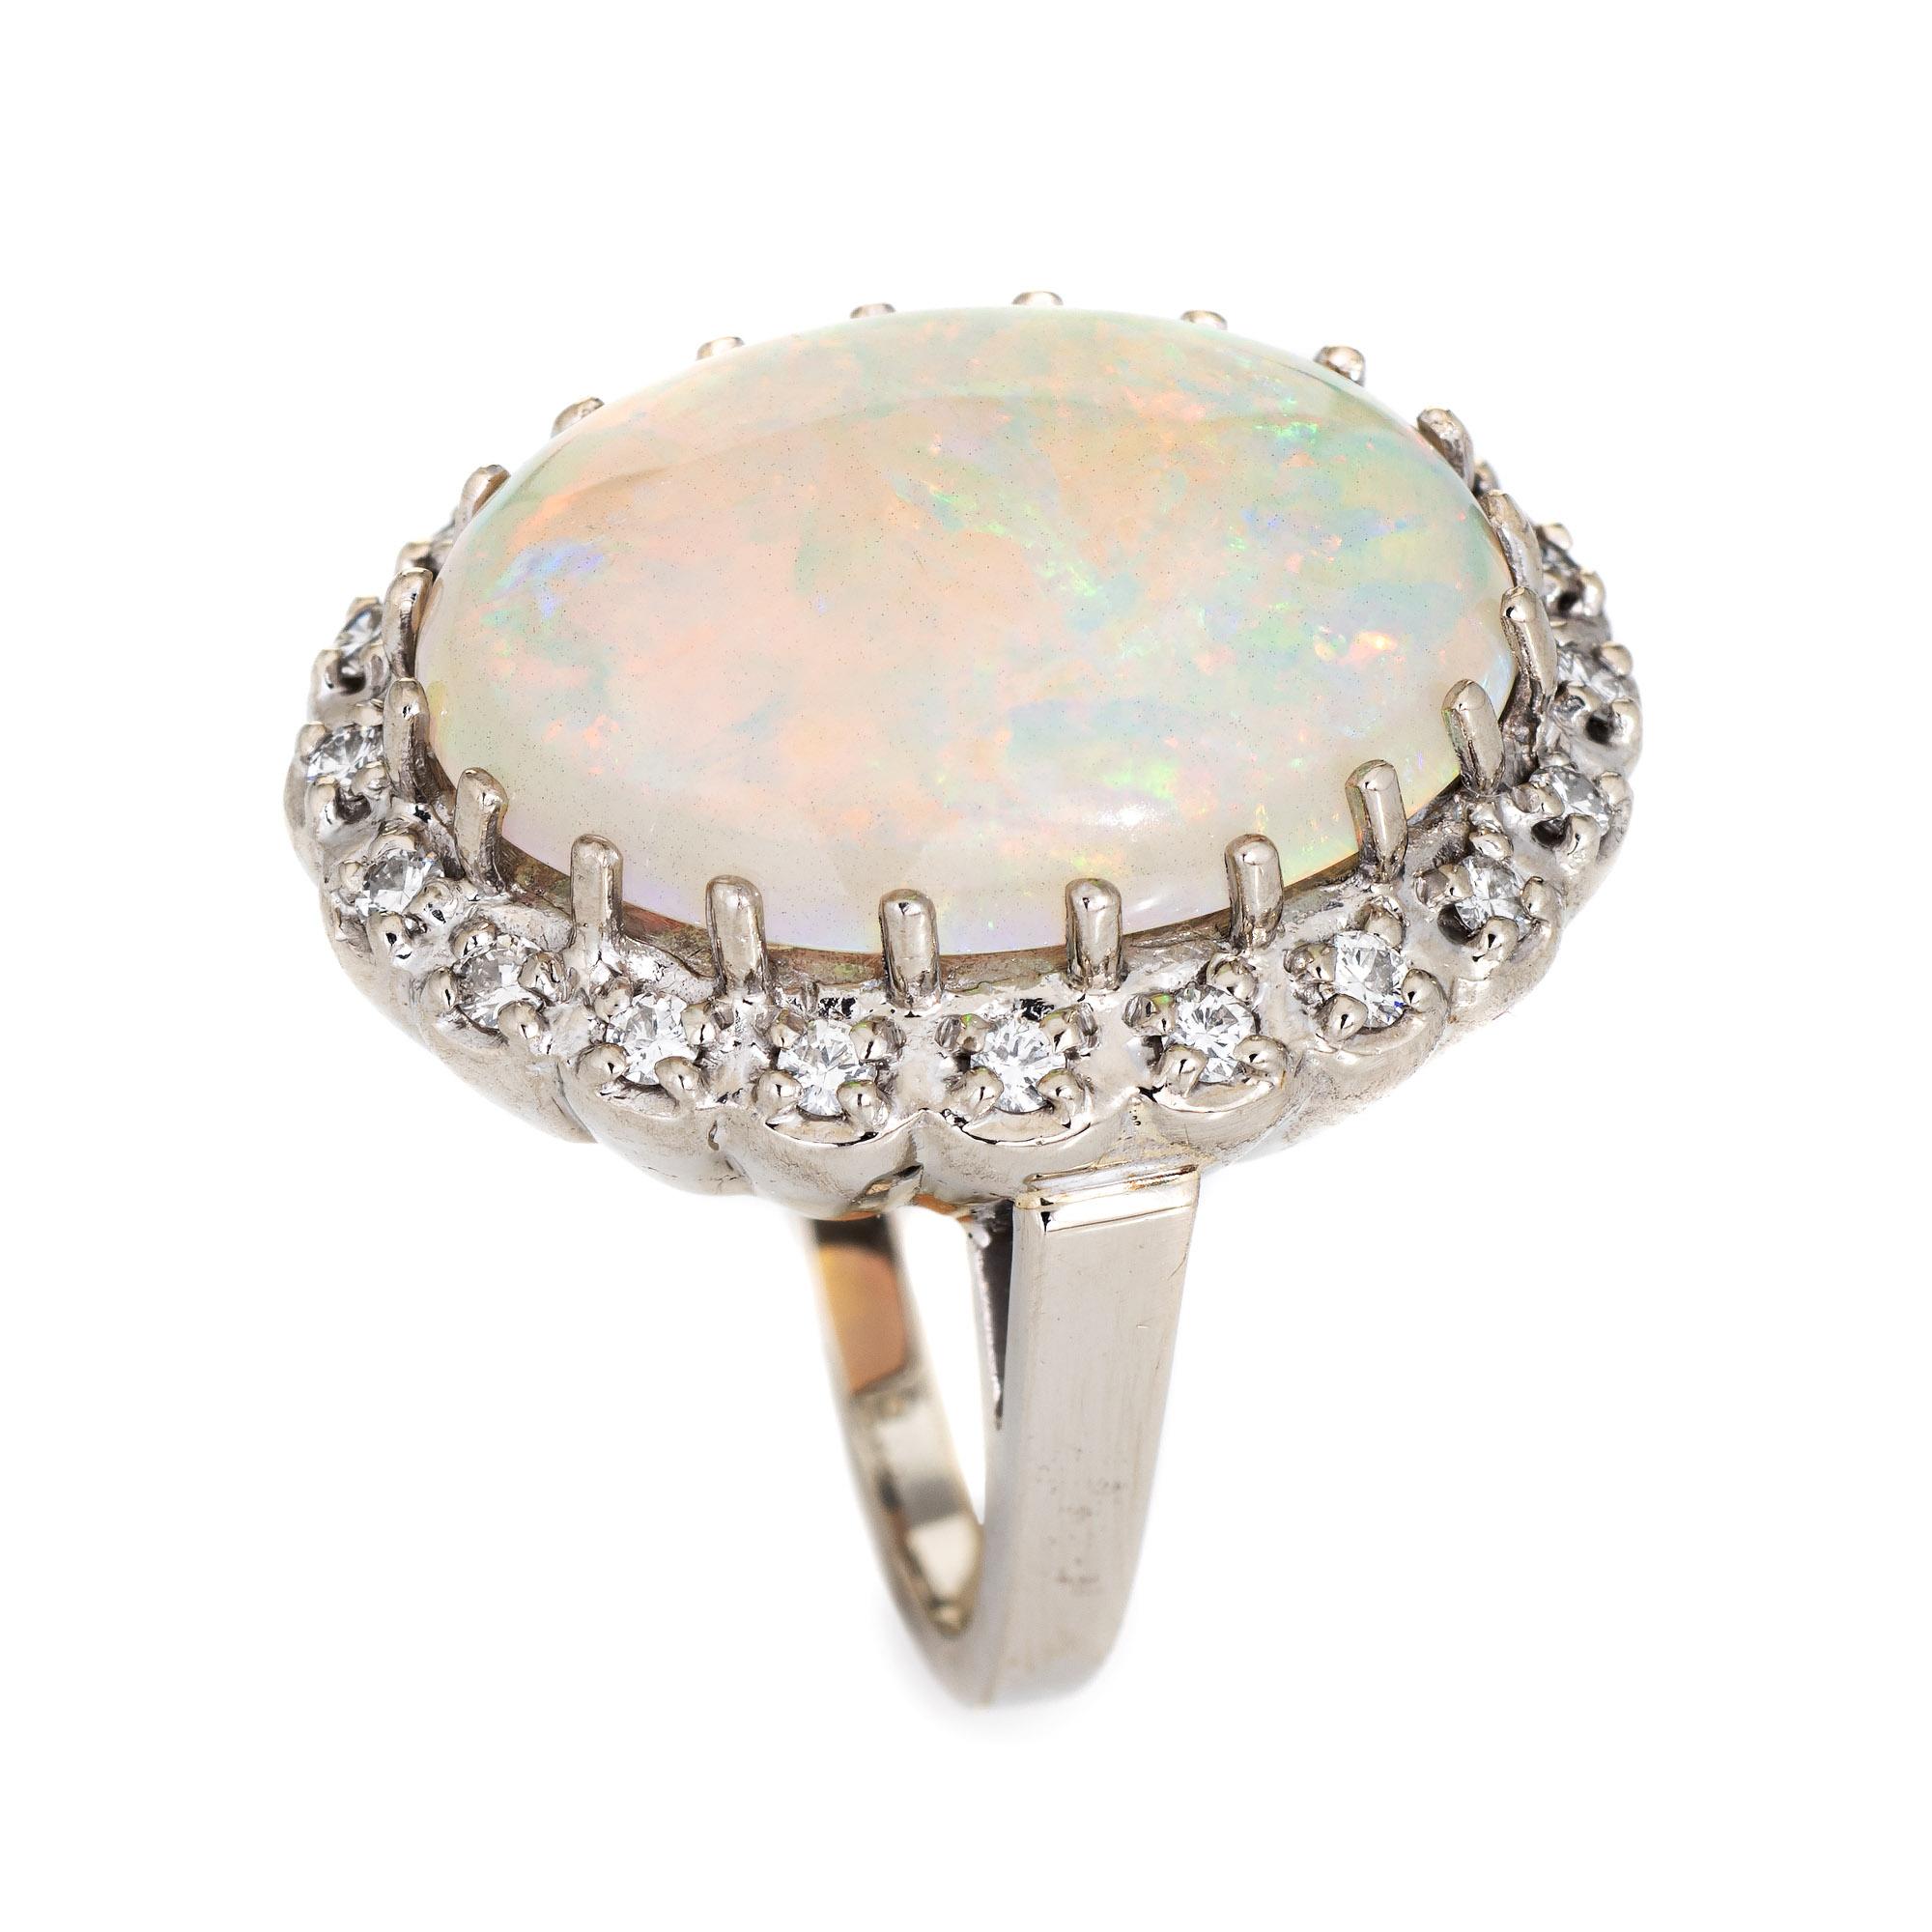 Stylish vintage opal & diamond cocktail ring (circa 1970s to 1980s) crafted in 14 karat white gold. 

Natural opal measures 20mm x 15mm (estimated at 14.50 carats) is accented with 20 estimated 0.02 carat round brilliant cut diamonds. The total